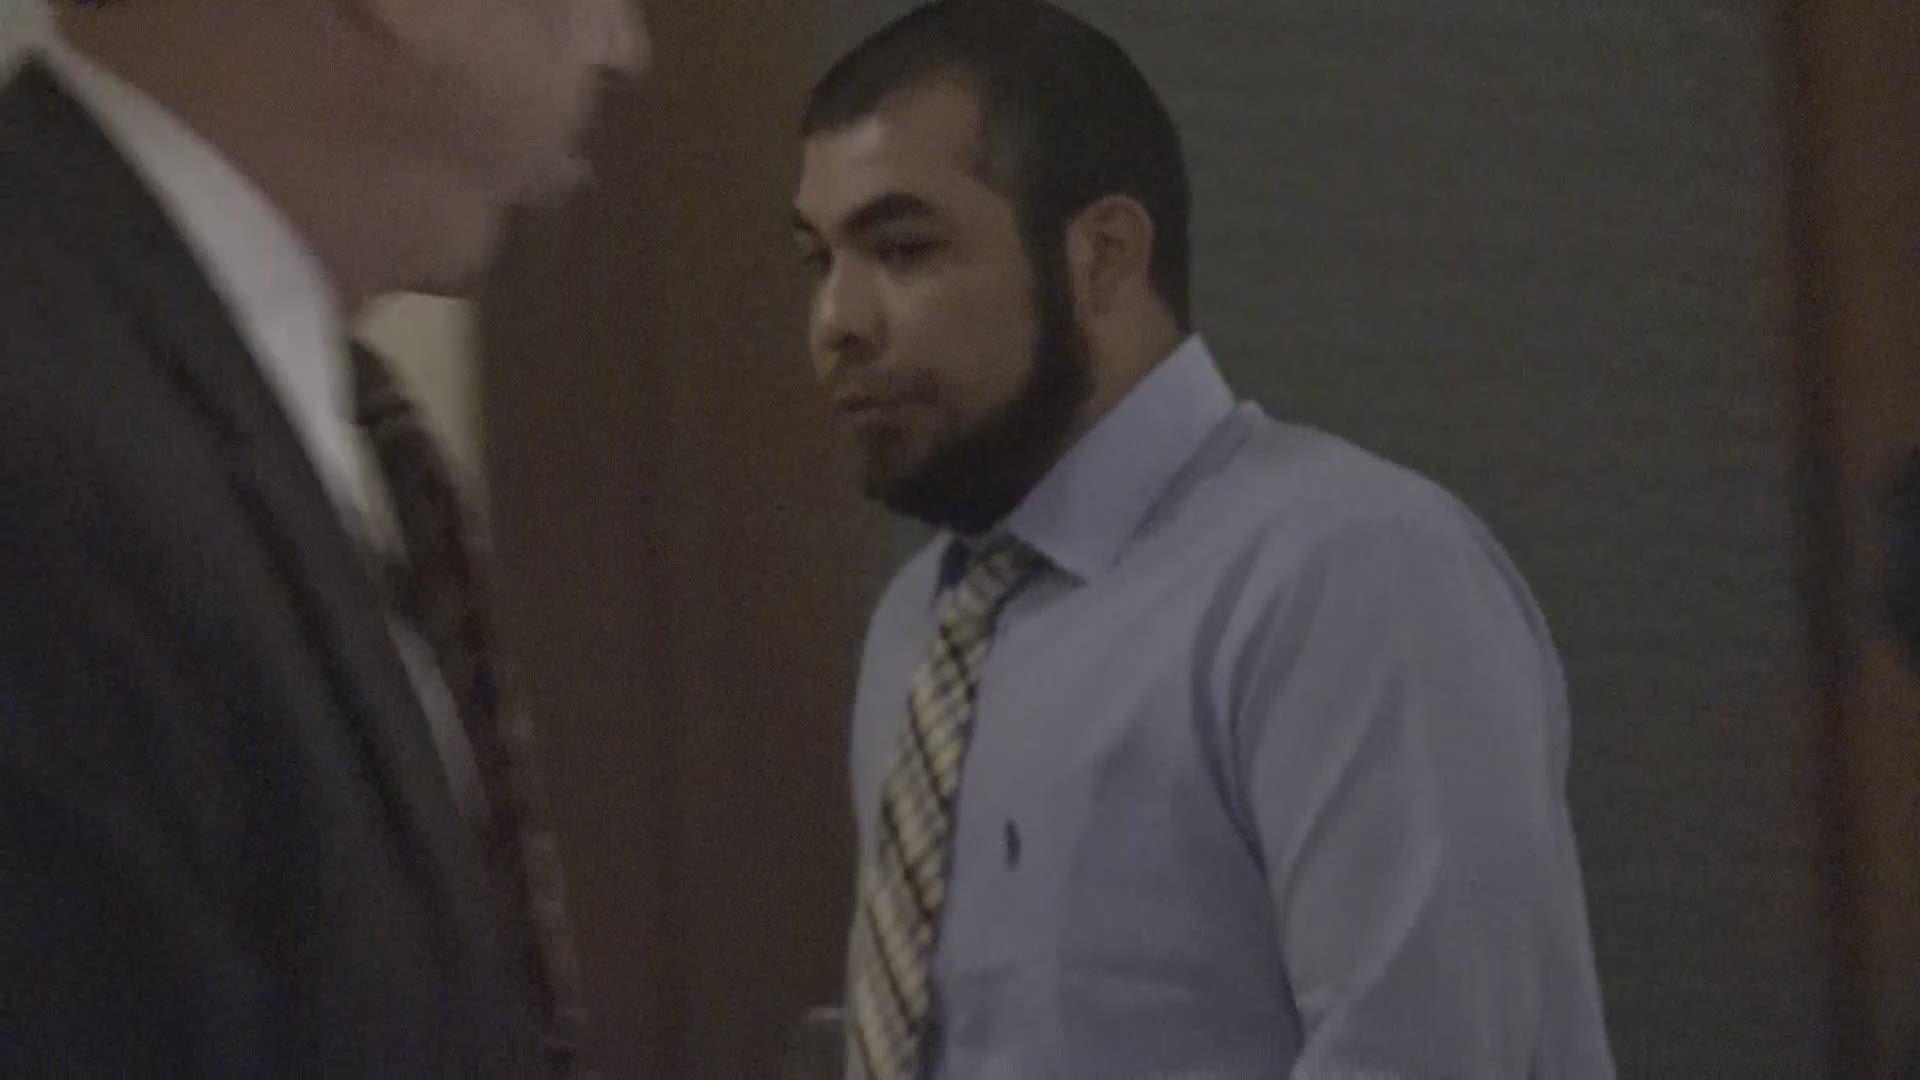 Alec Nava faces trial for allegedly hitting, paramedic Rory Barros, while drunk driving.